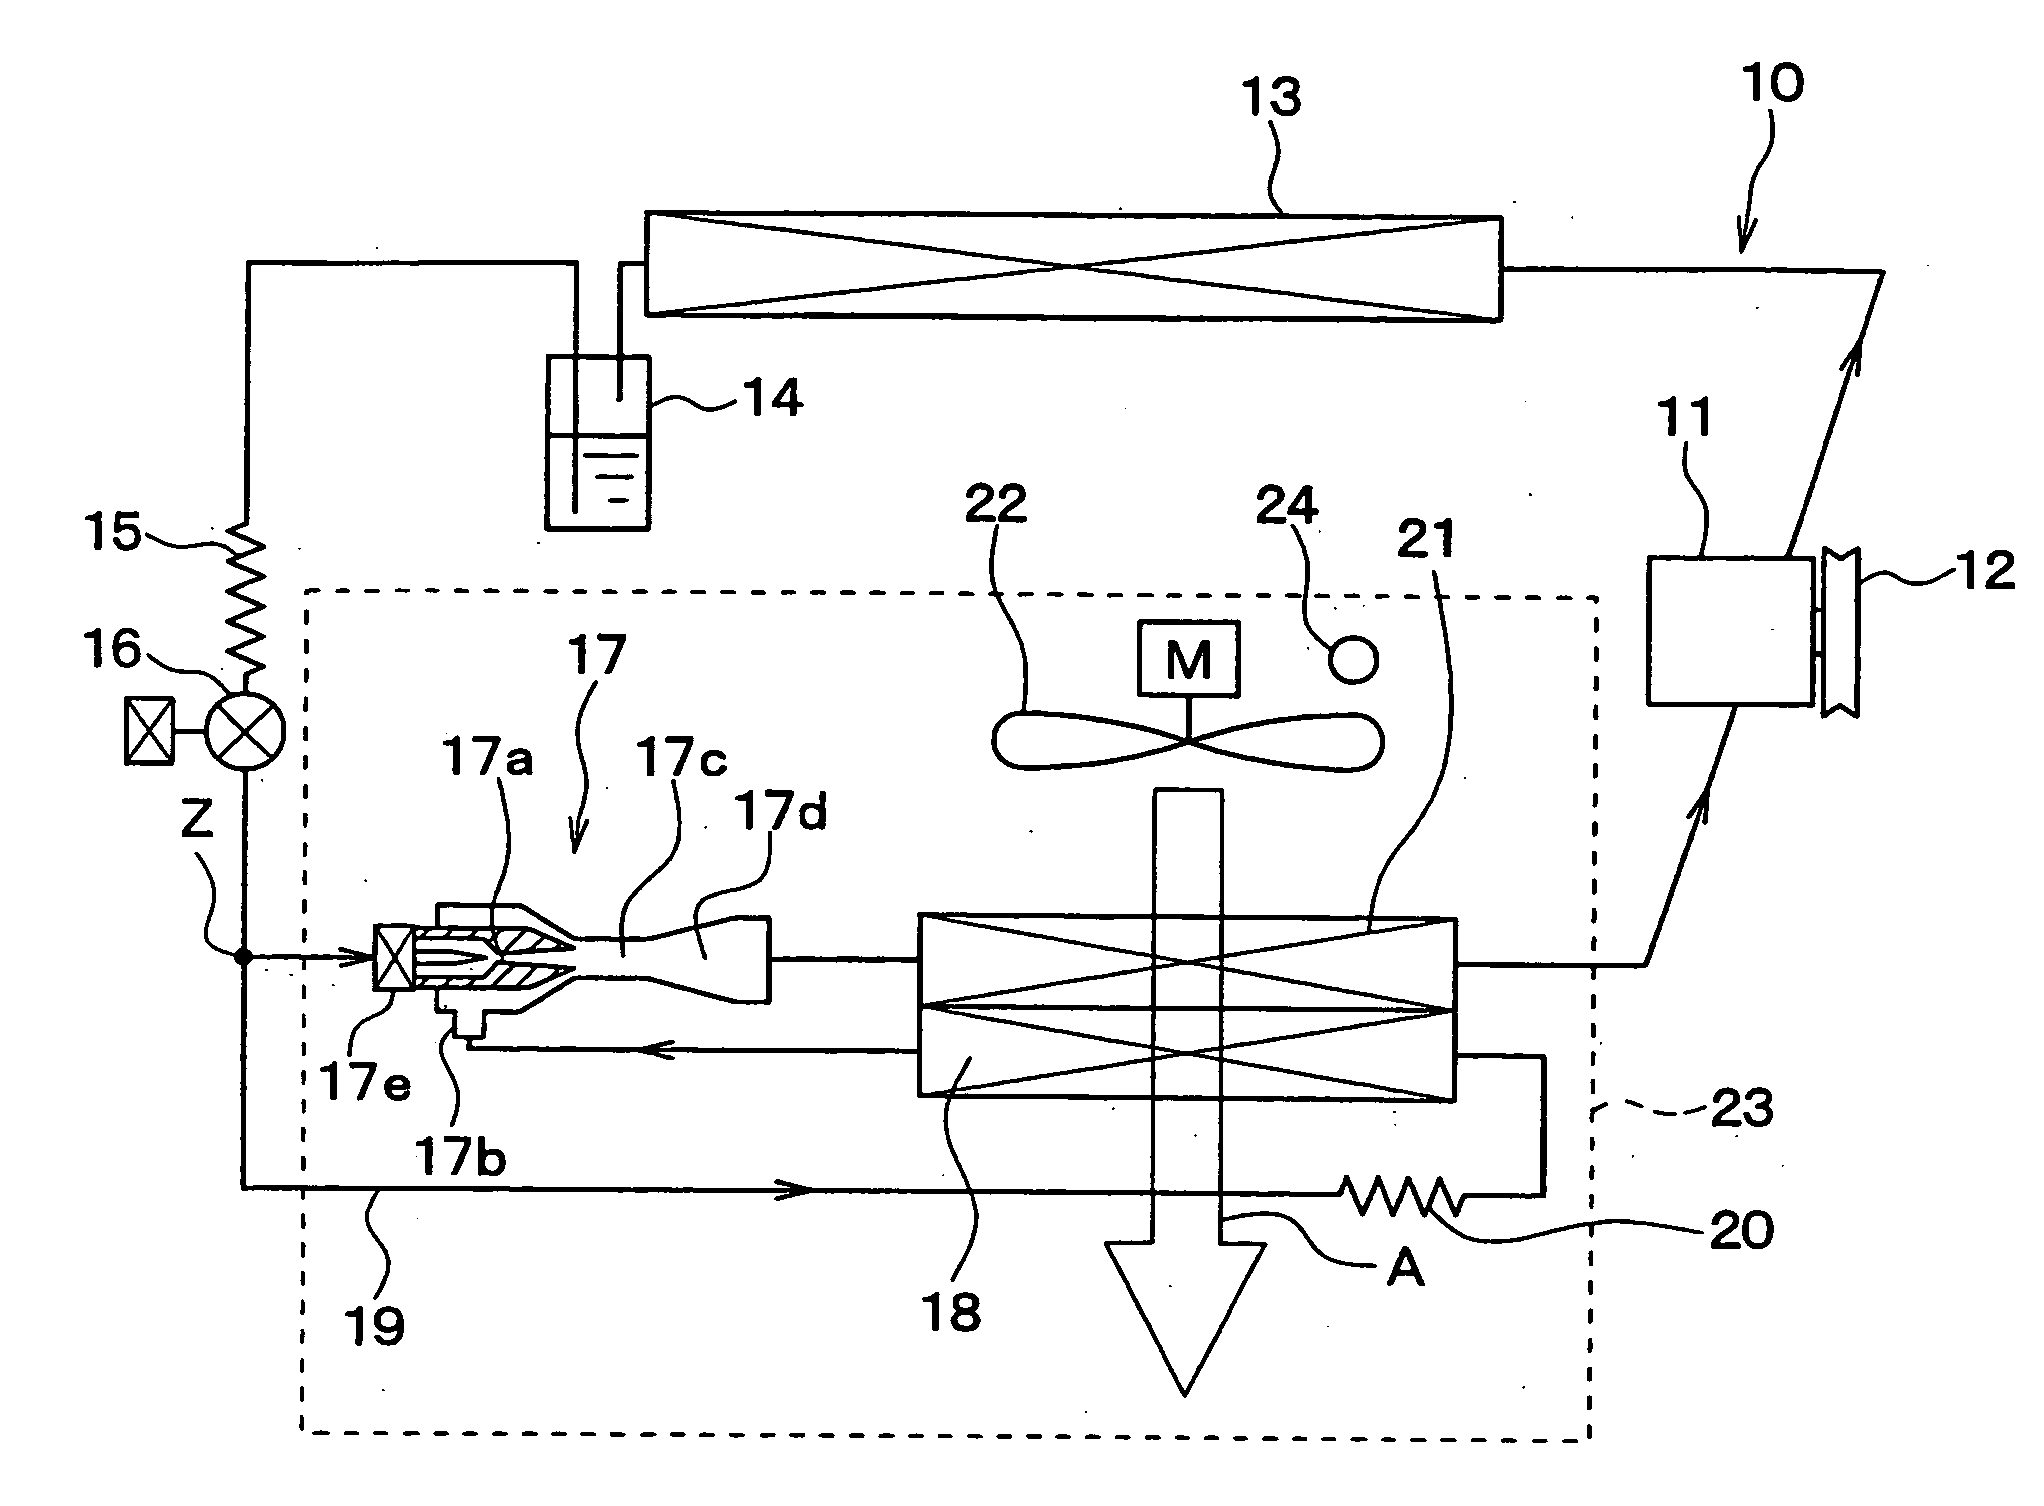 Ejector cycle device